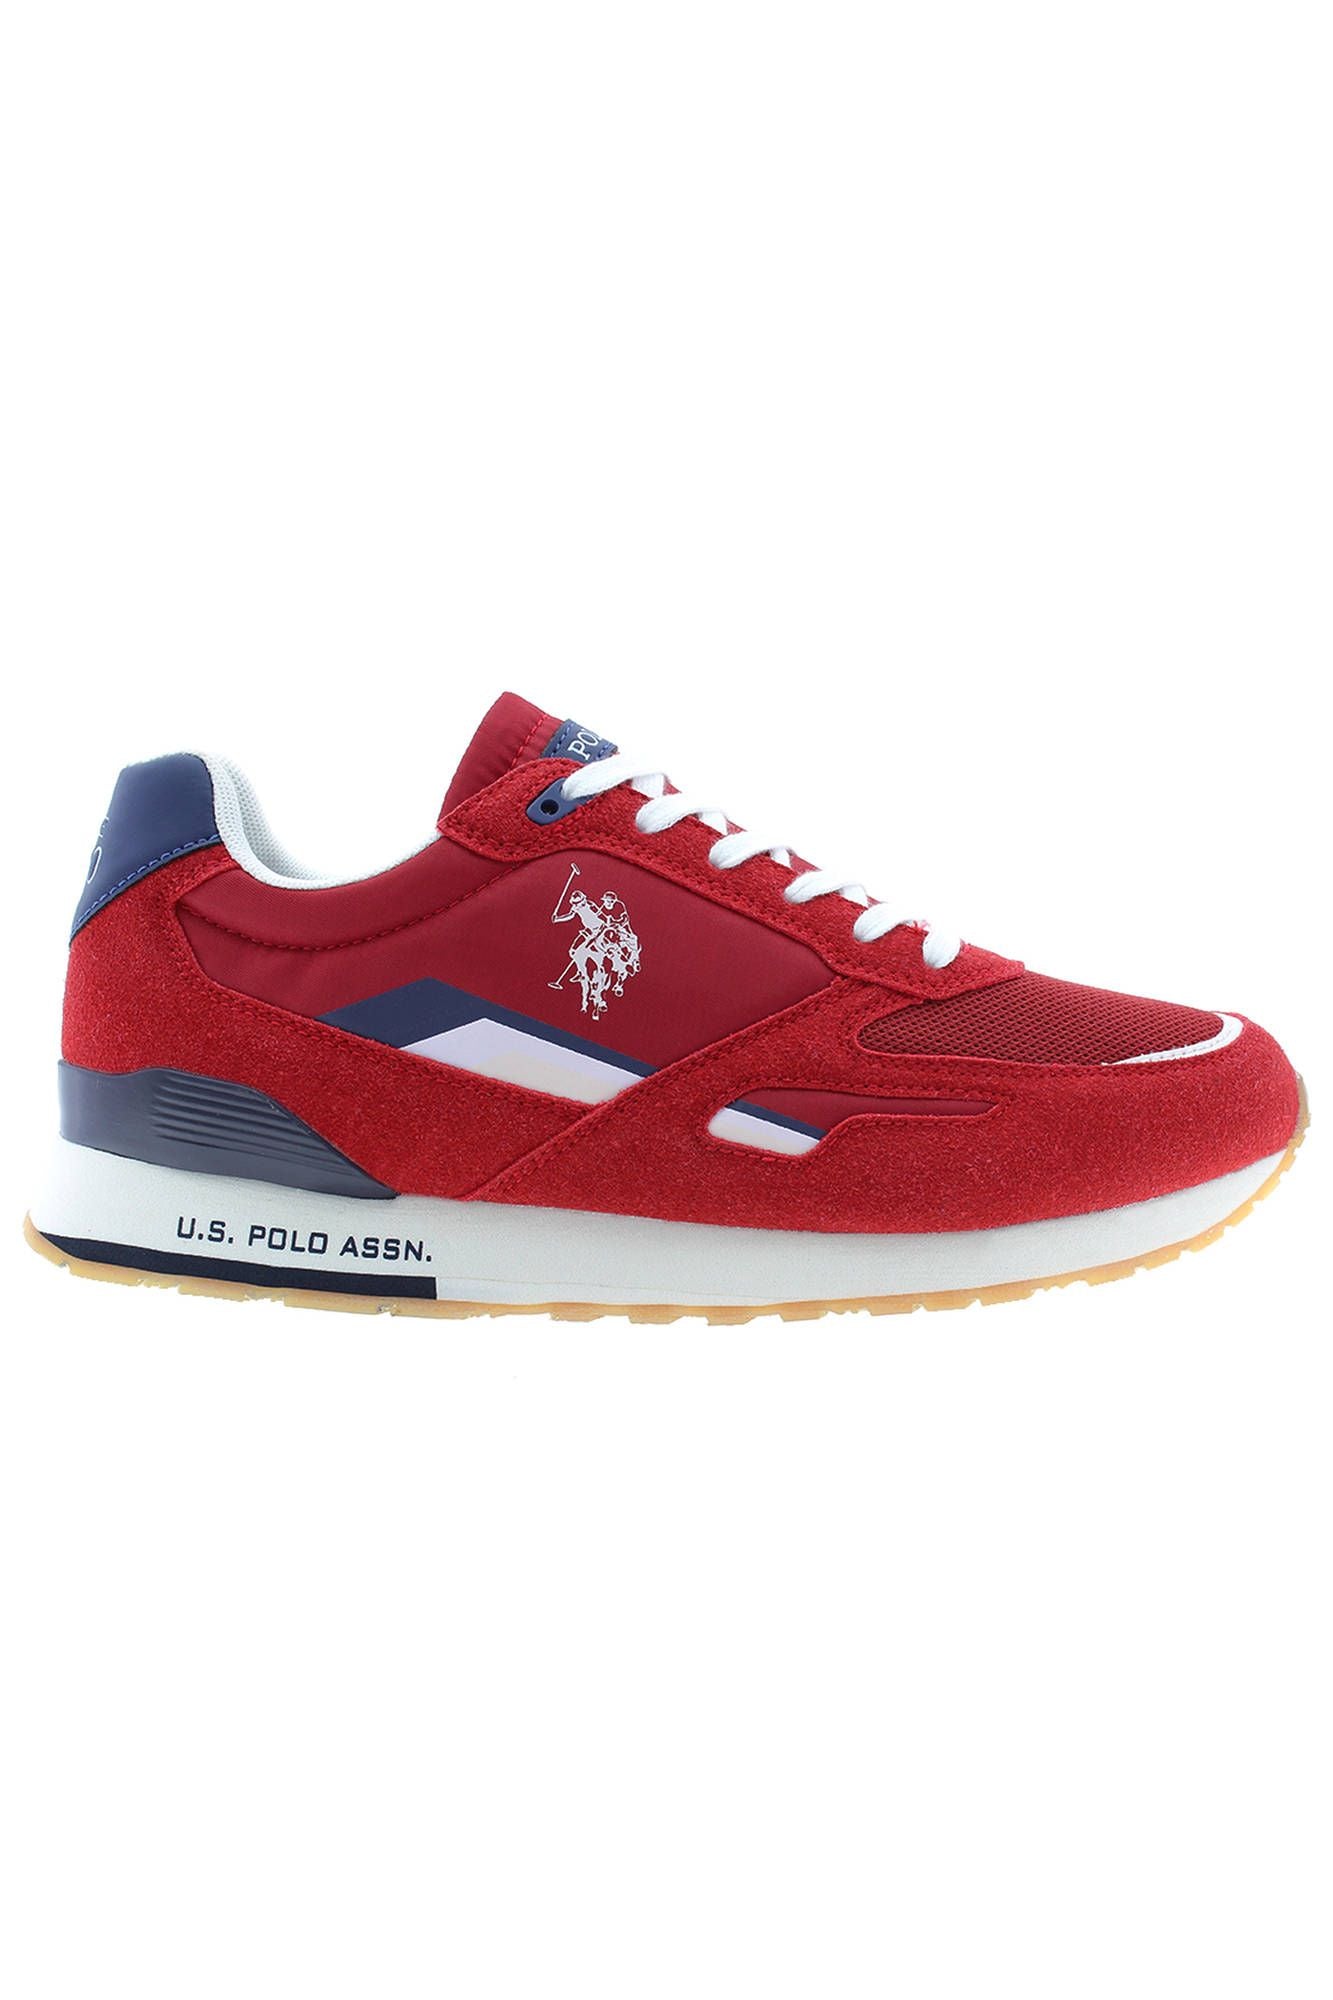 U.S. POLO ASSN. Sleek Pink Sneakers with Contrasting Details